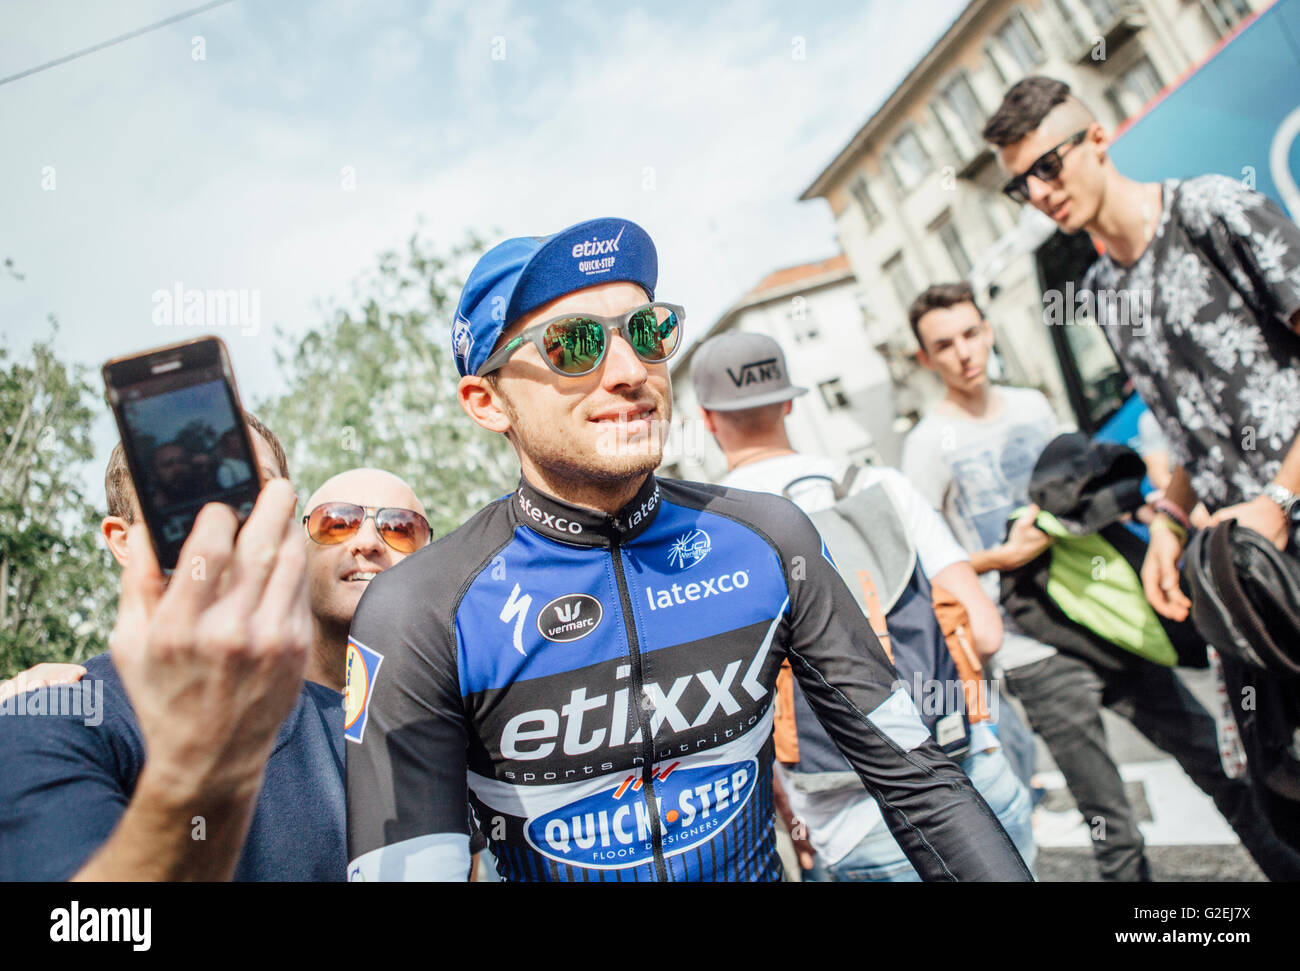 Torino, Italy, May 29th 2016. Ginluca Brambilla from Etixx Quick Step seen after the final stage (Torino) of the Giro d’Italia 2016. Credit:  Gonzales Photo - Alberto Grasso. Stock Photo